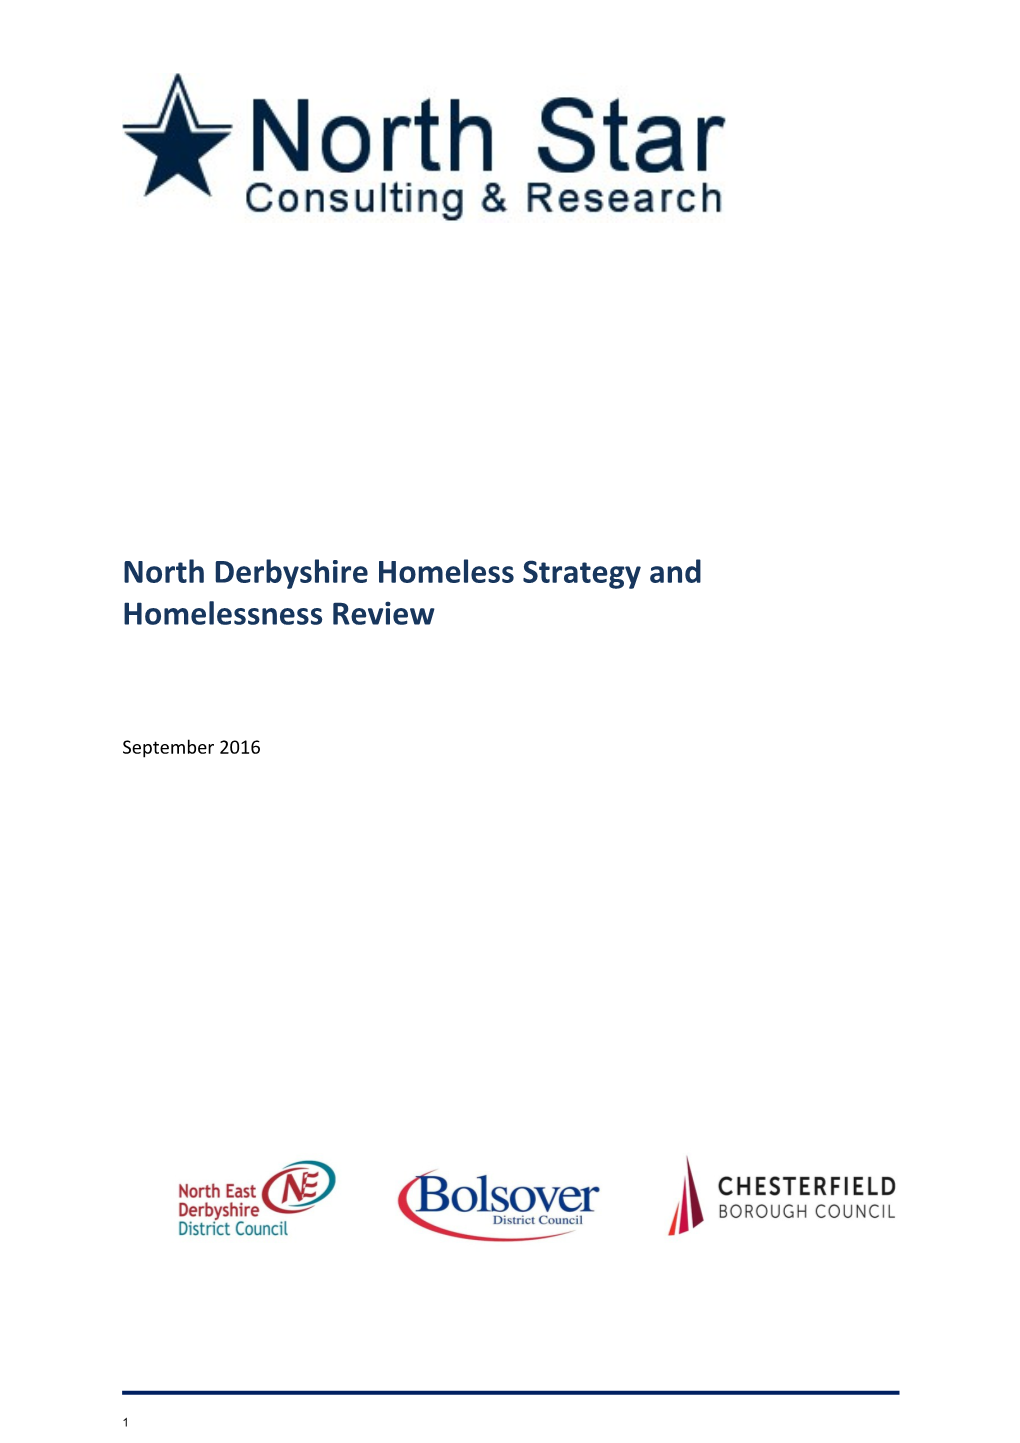 North Derbyshire Homeless Strategy and Homelessness Review